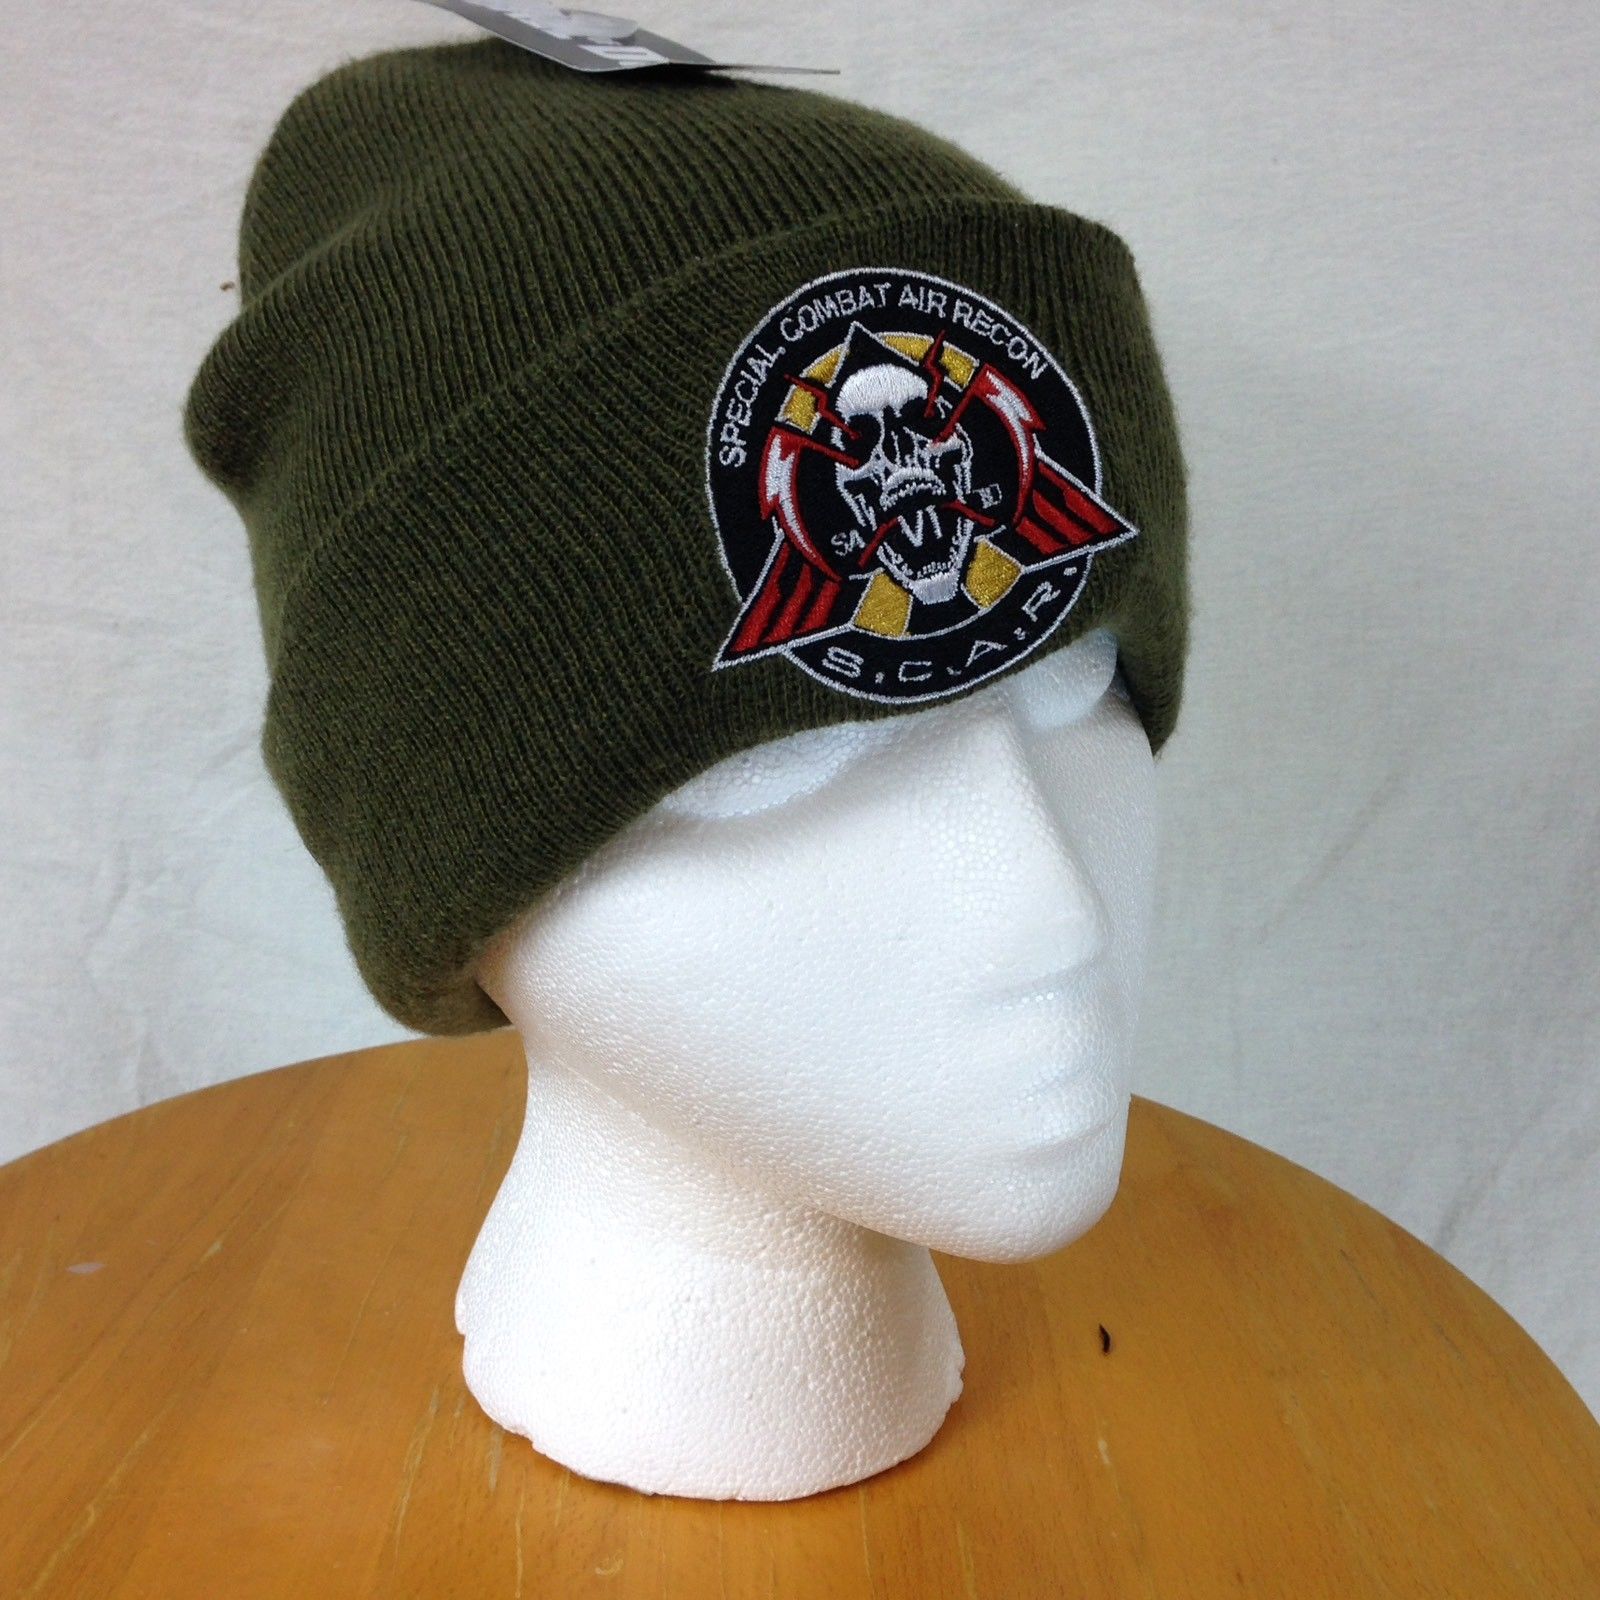 Call of Duty S.C.A.R. Special Combat Air Recon Winter Beanie Skull Cap Hat Adult